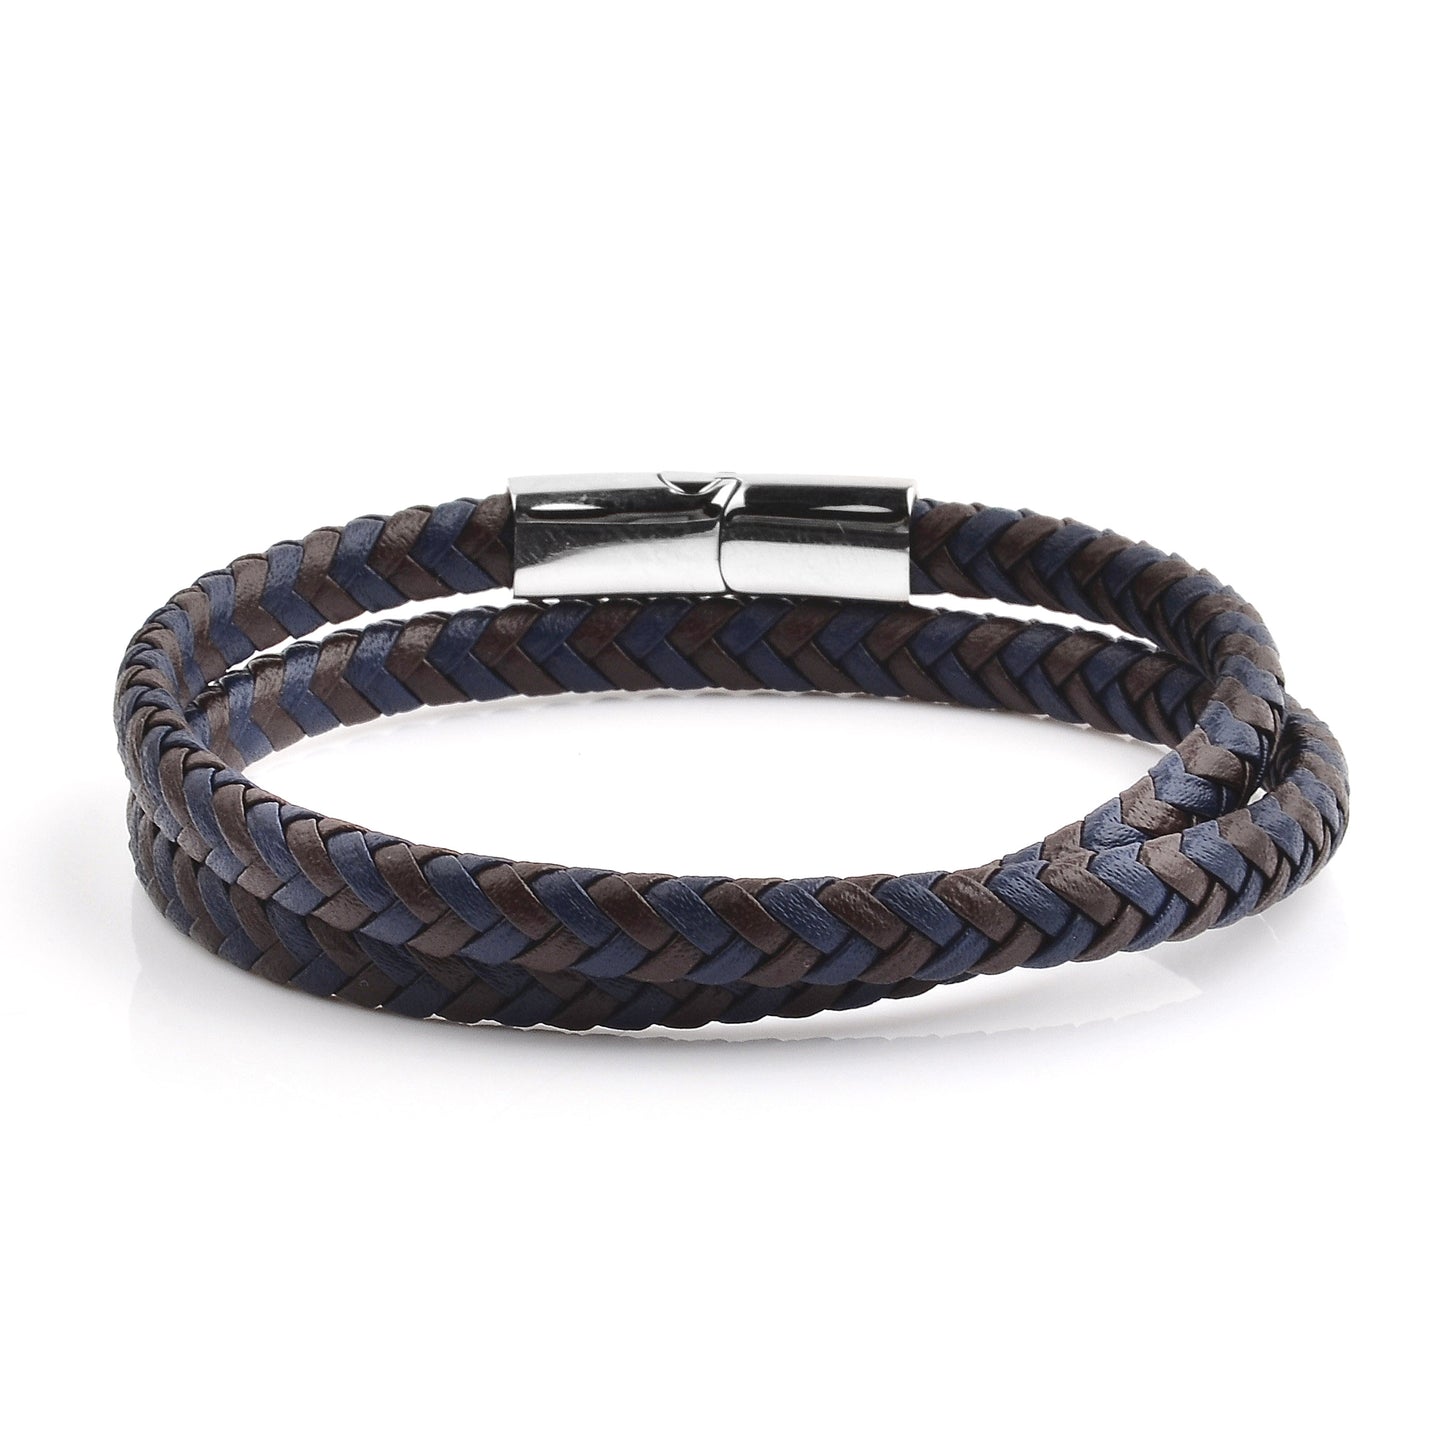 Men's Braided Blue and Brown Leather Wrap Bracelet